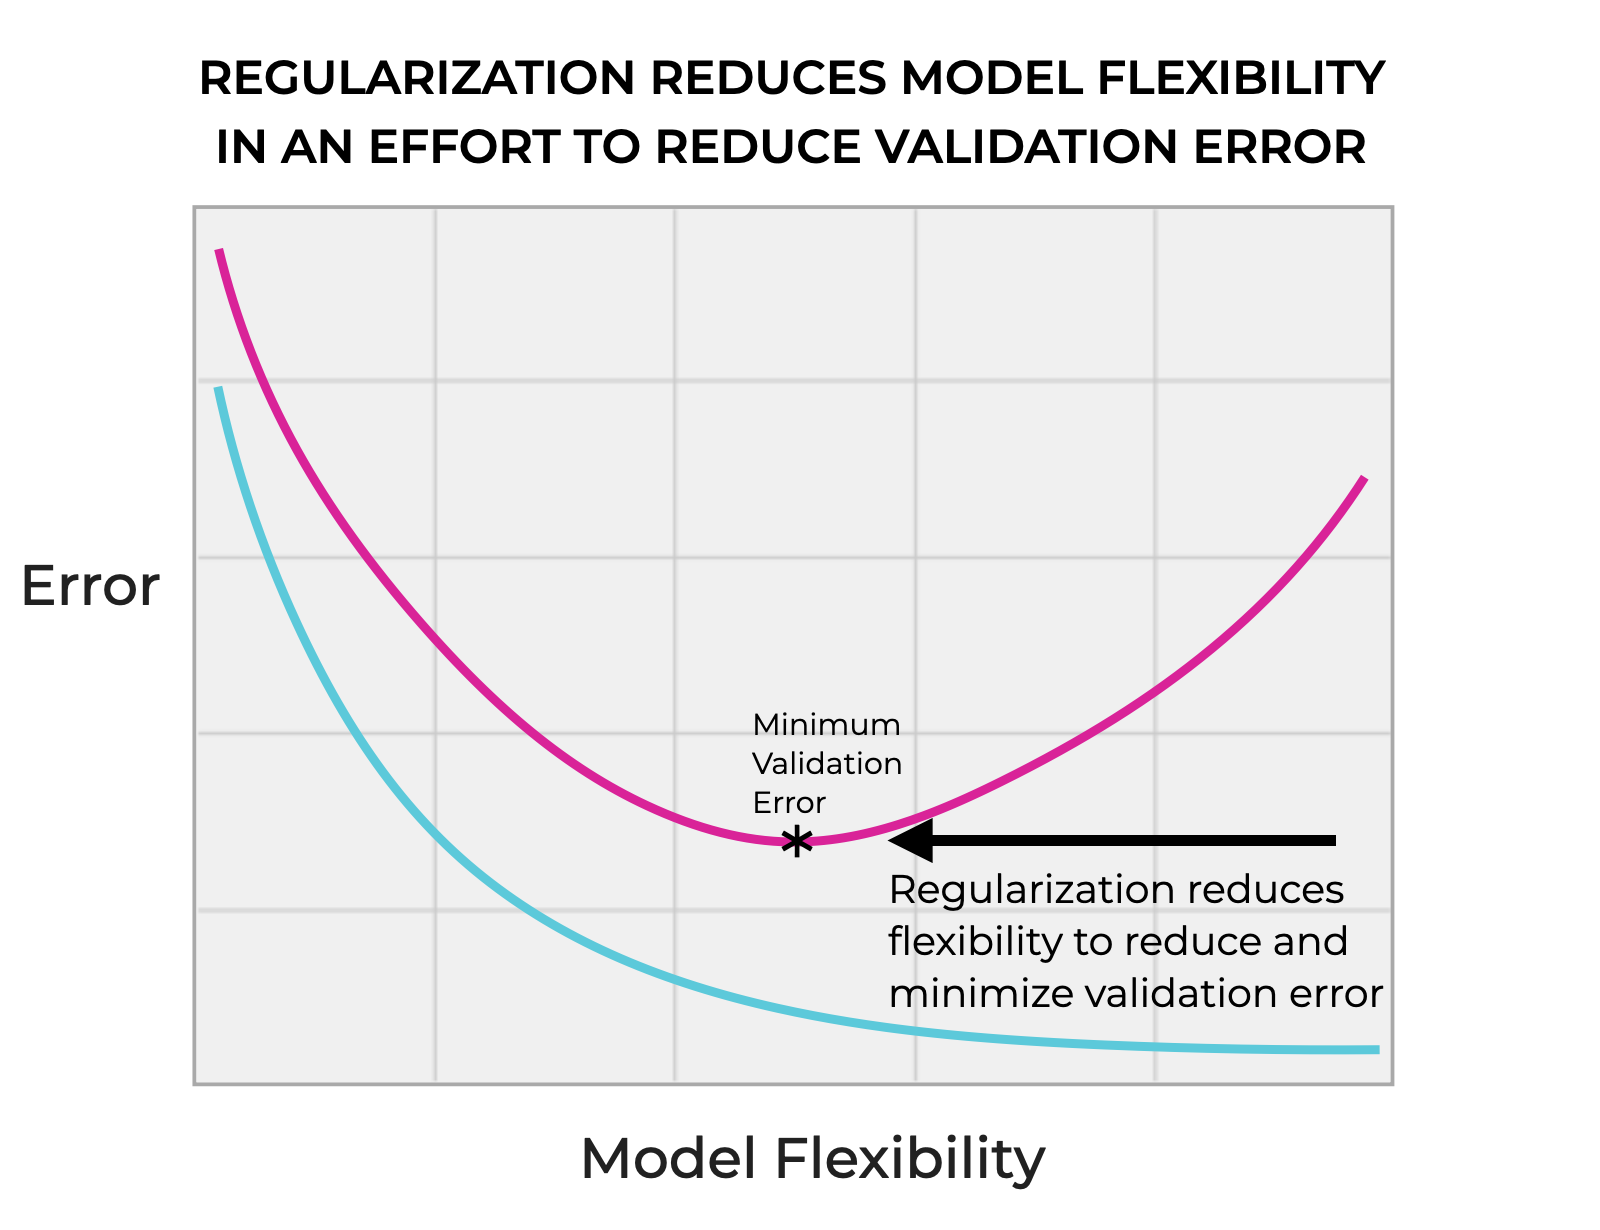 An image that shows how regularization tries to reduce model flexibility in an effort to reduce and minimize validation error.